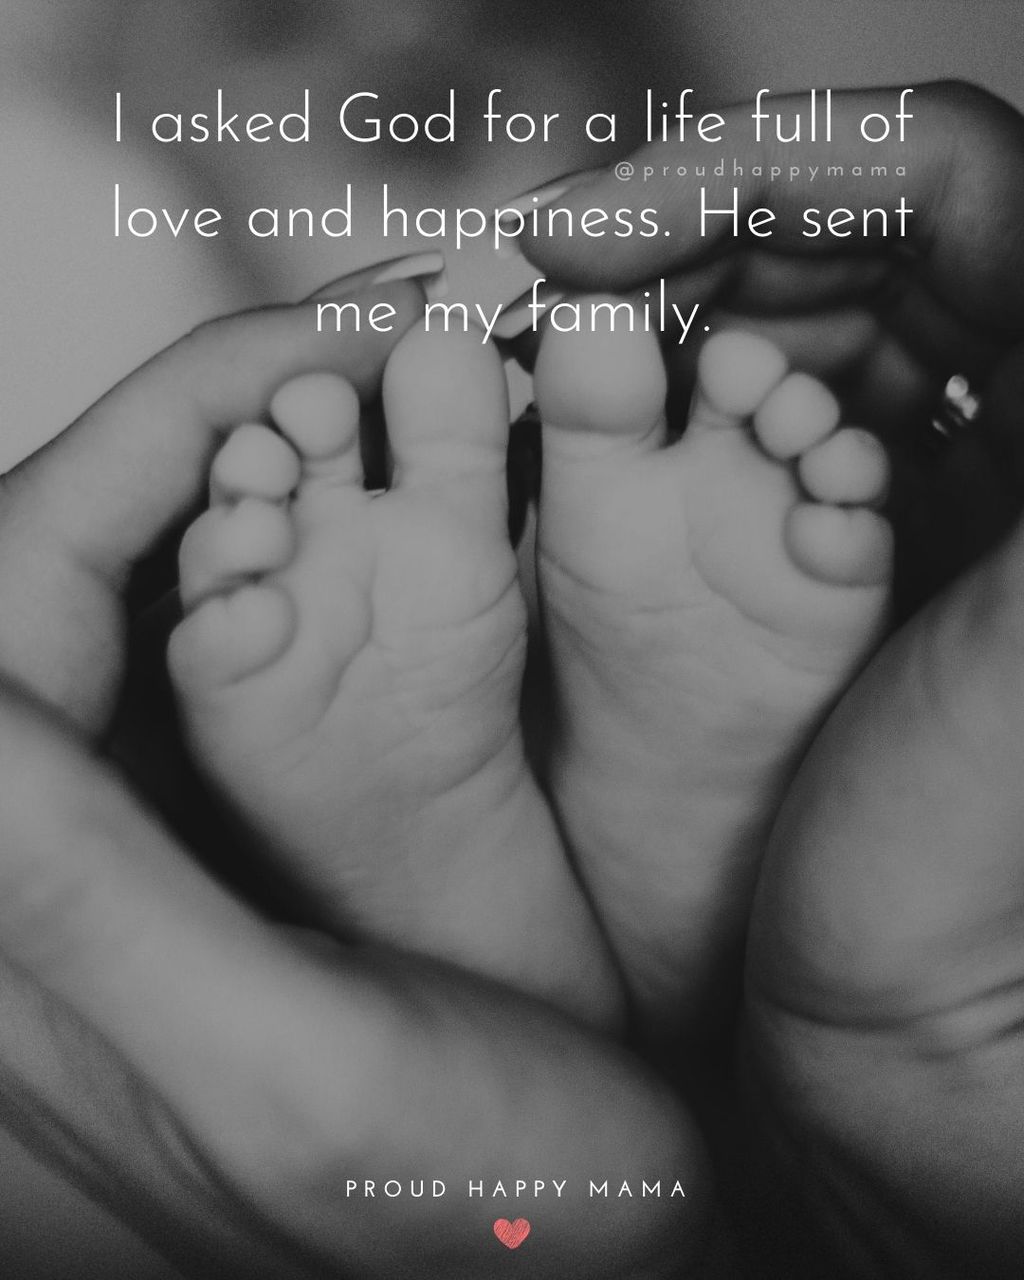 Family Quotes Inspirational | I asked God for a life full of love and happiness. He sent me my family.